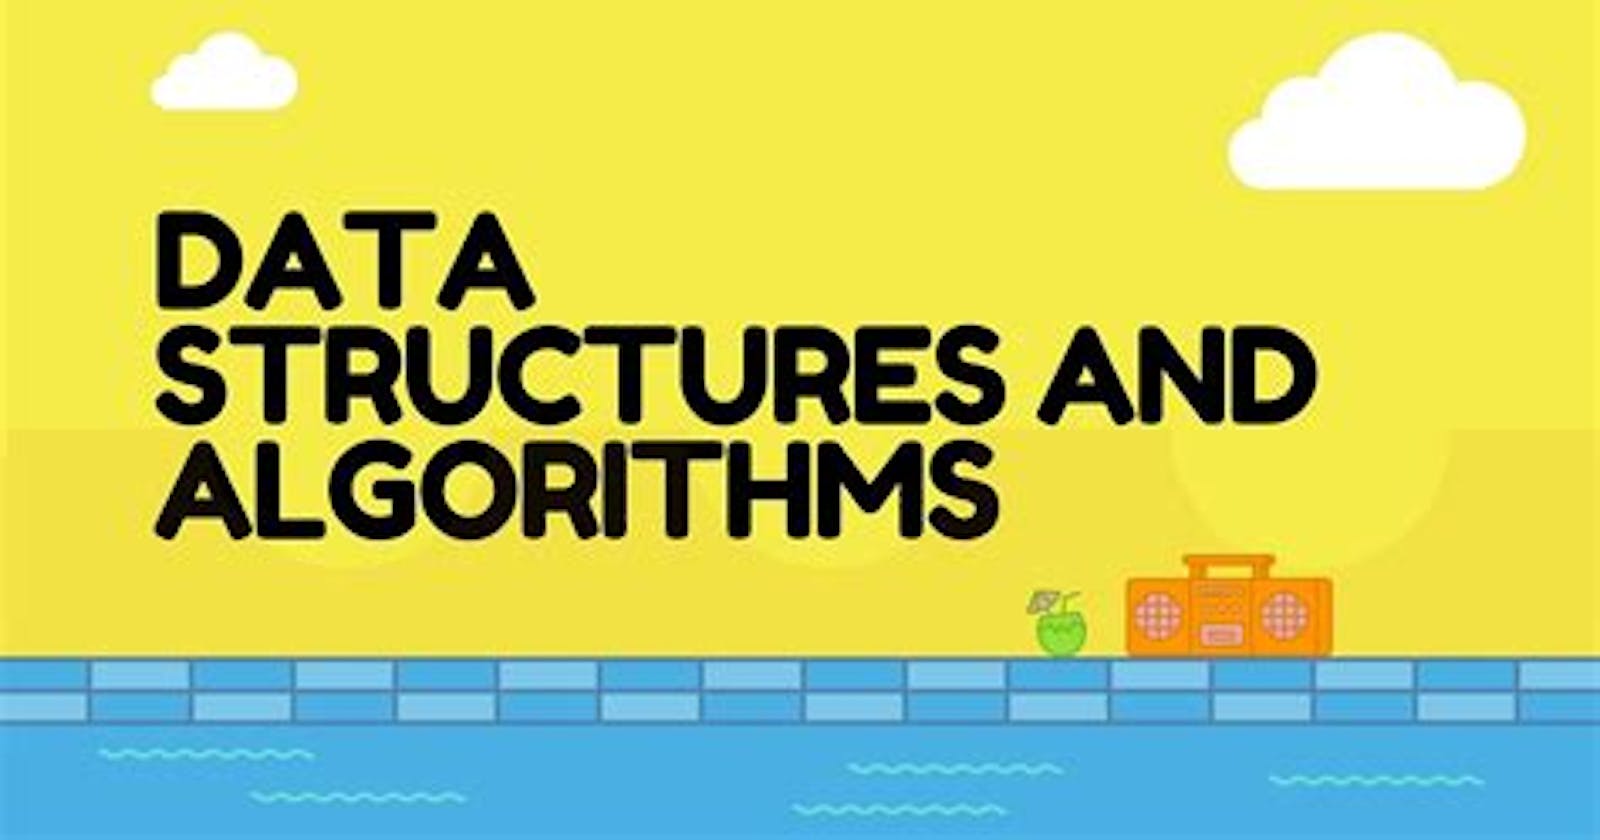 Data structures and algorithms (Intro)